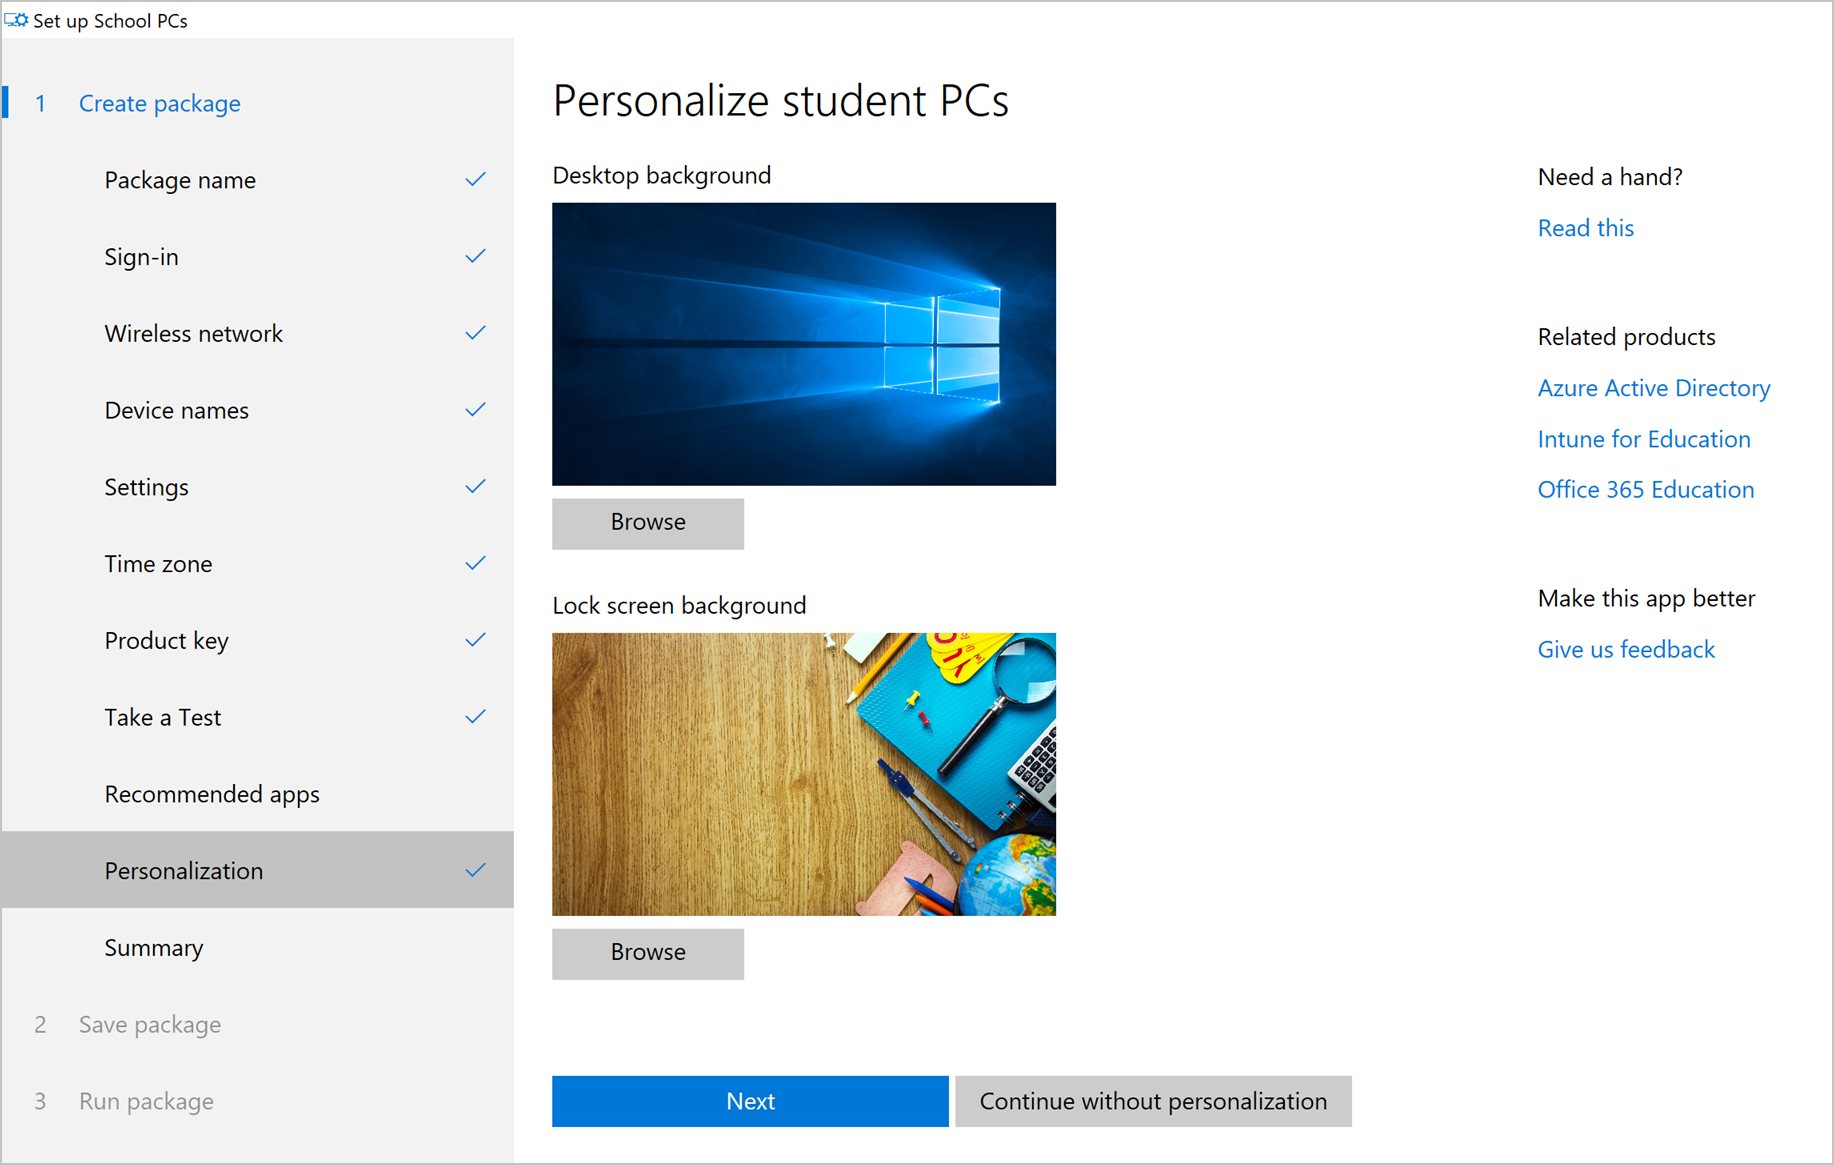 Example image of the Set up School PCs app, Personalization screen, showing the default desktop and lock screen background photos, a Browse button under each photo, a blue Next button, and a Continue without personalization button.